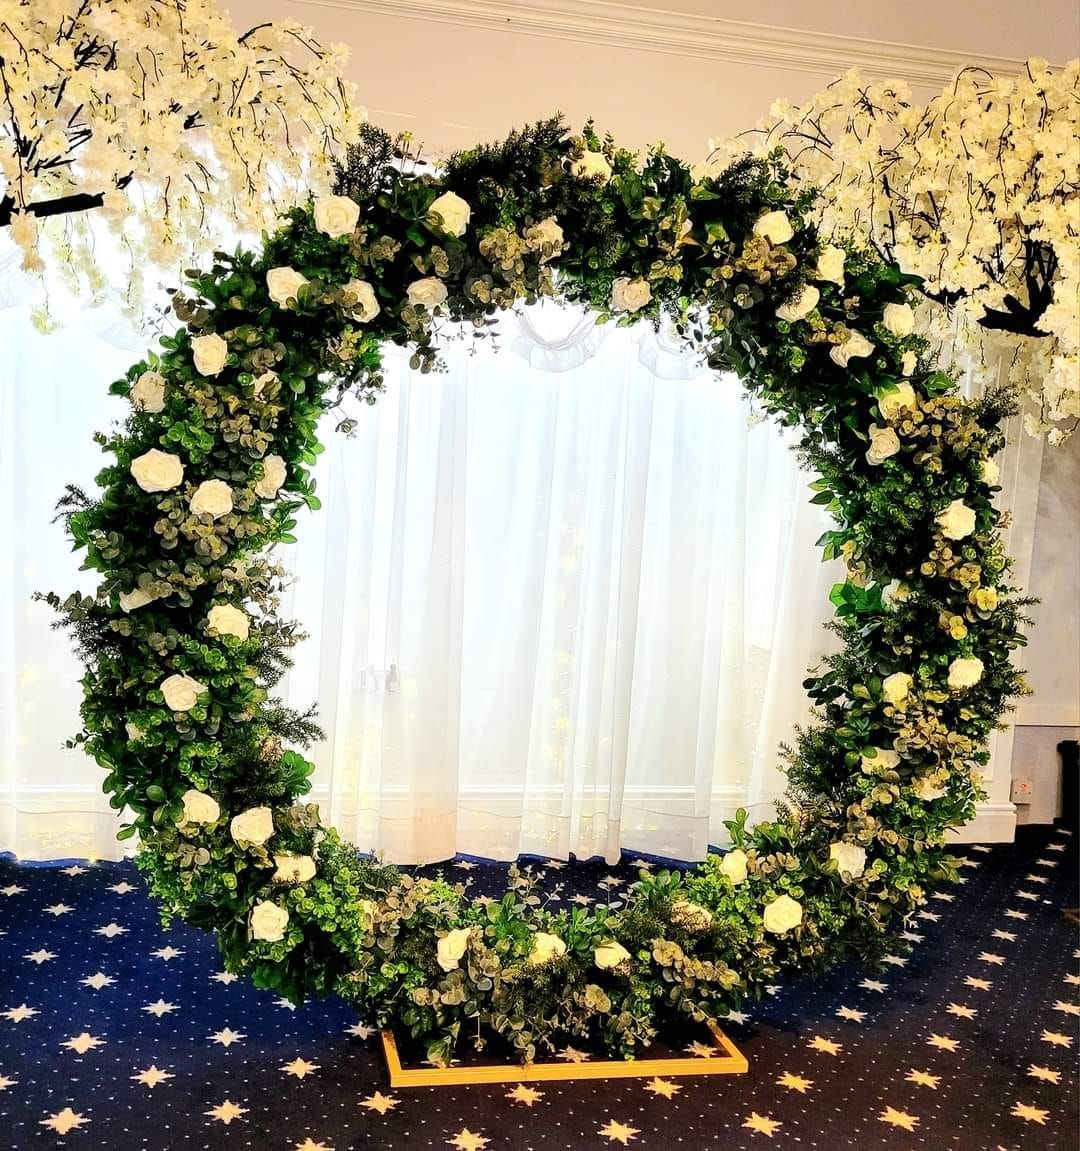 6ft round moongate with greenery and roses